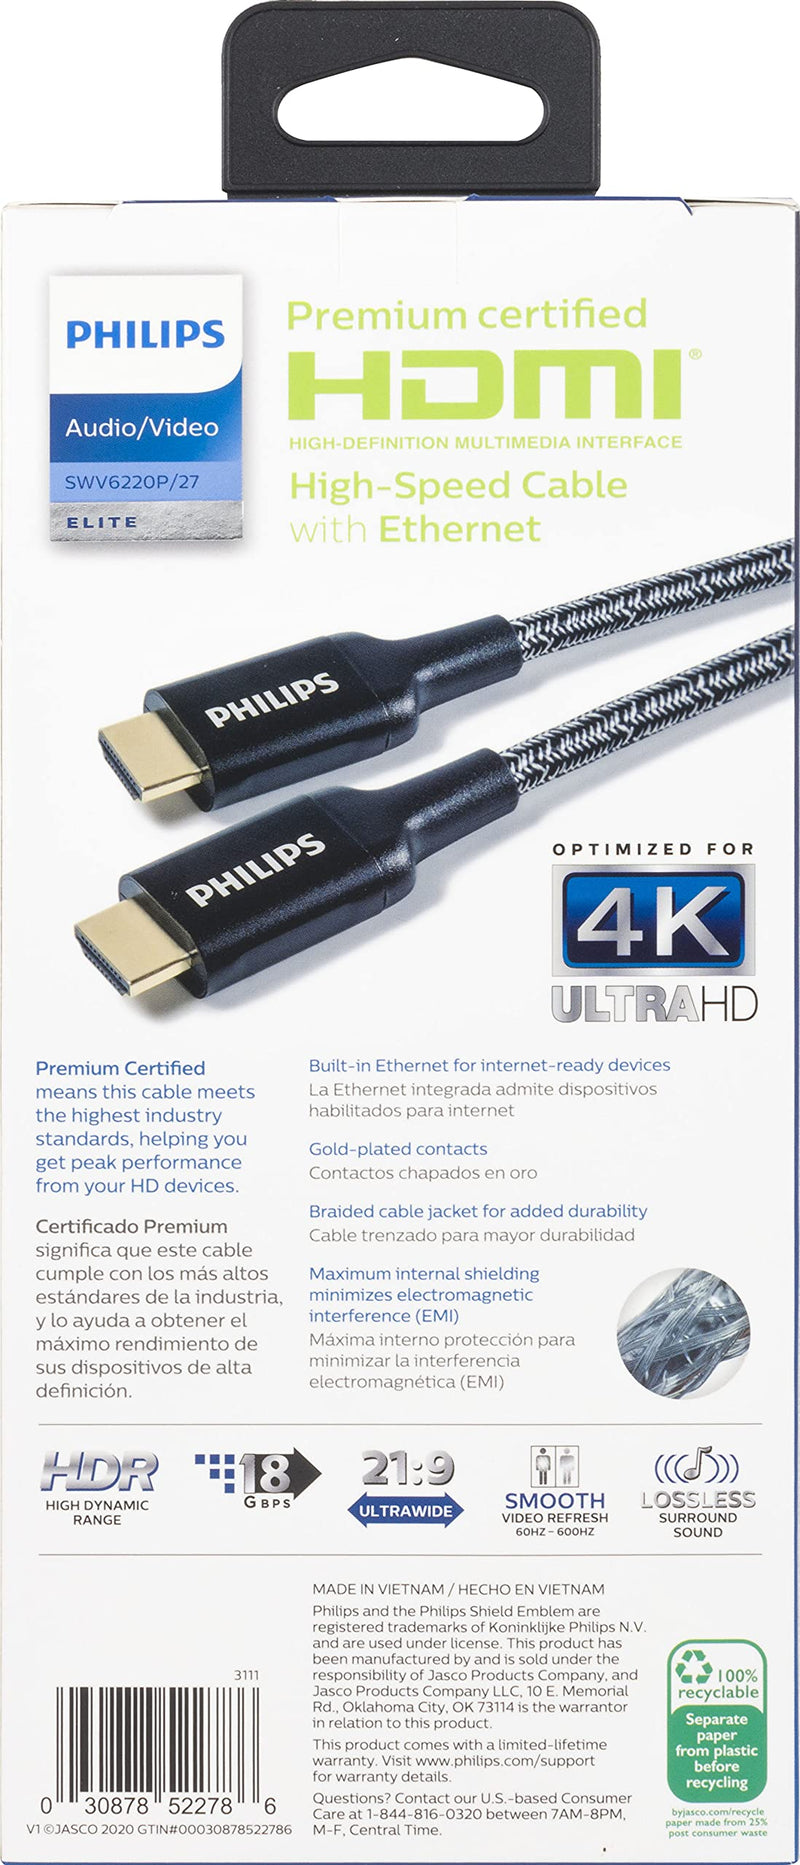 Philips Premium Certified HDMI Cable, 6 ft. 1080p 120Hz 4K 60Hz, 18Gbps Ethernet HDMI 2.0, Gold Connectors, Braided Cable, for TV, Monitor, Laptop, PS4, PS5, Xbox One X S, SWV6220P/27